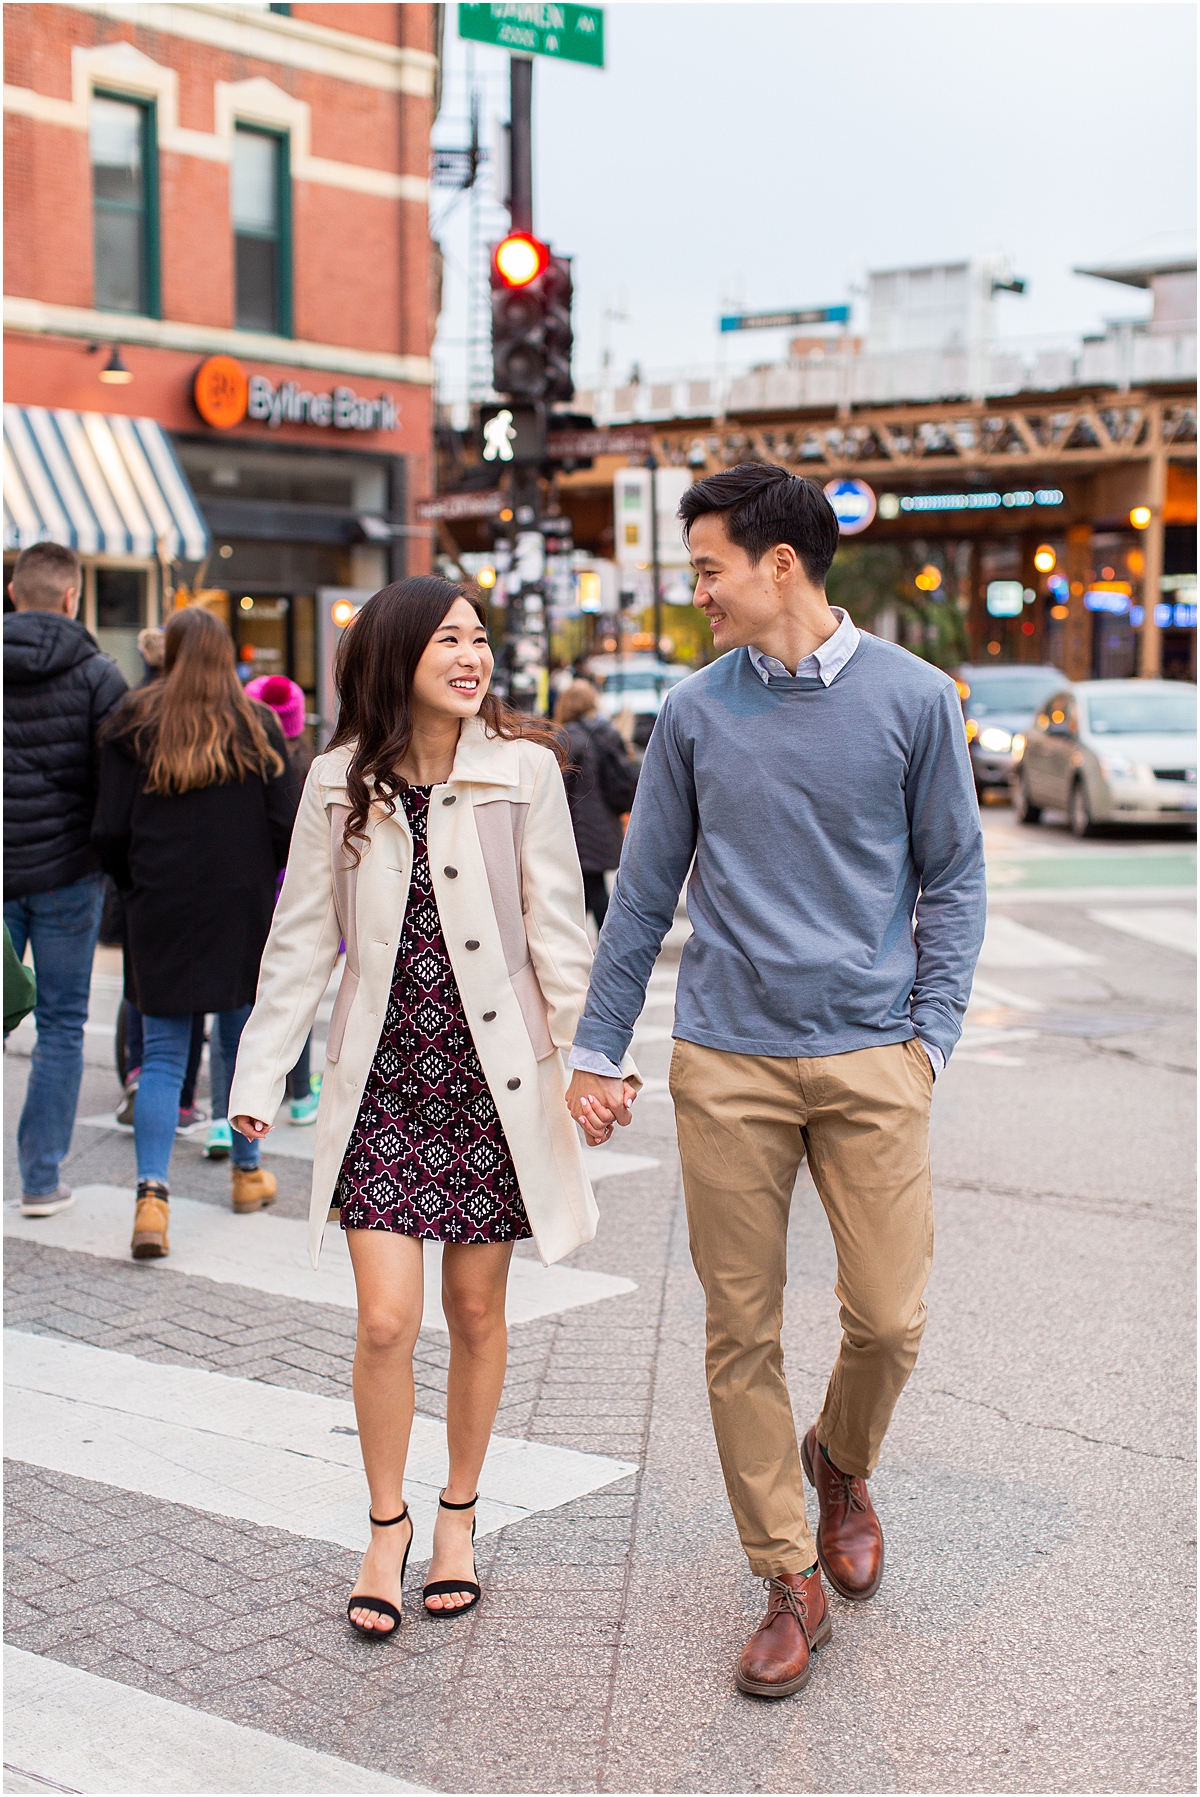 Explore your favorite Chicago Neighborhood during engagement session